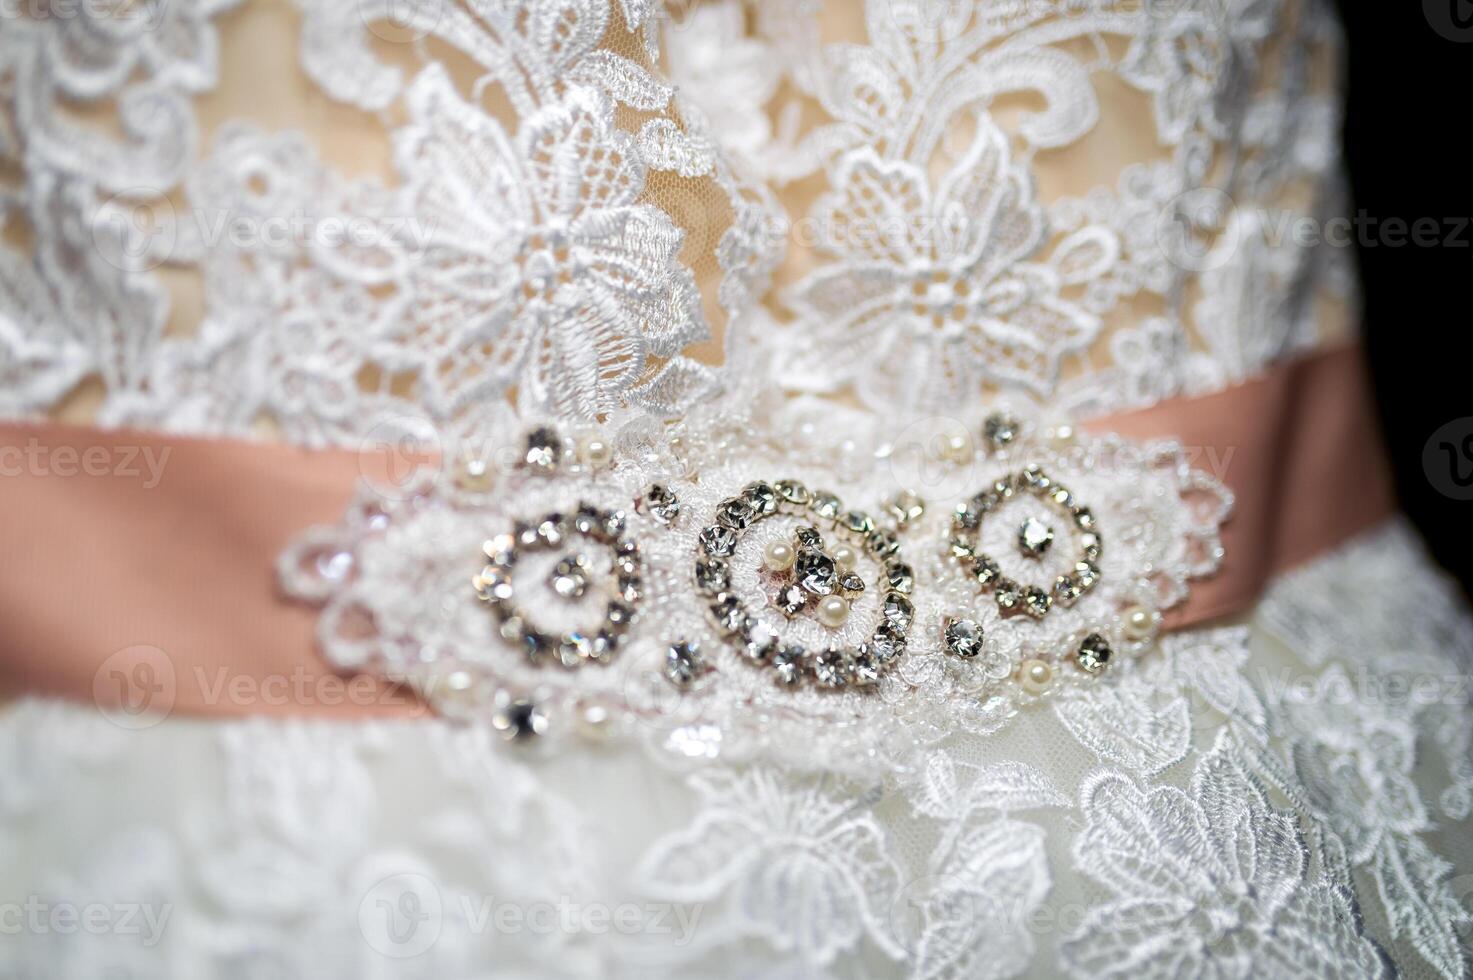 Fragment of a wedding dress with a belt decorated with precious stones and pearls. Bride's dress. Wedding concept photo